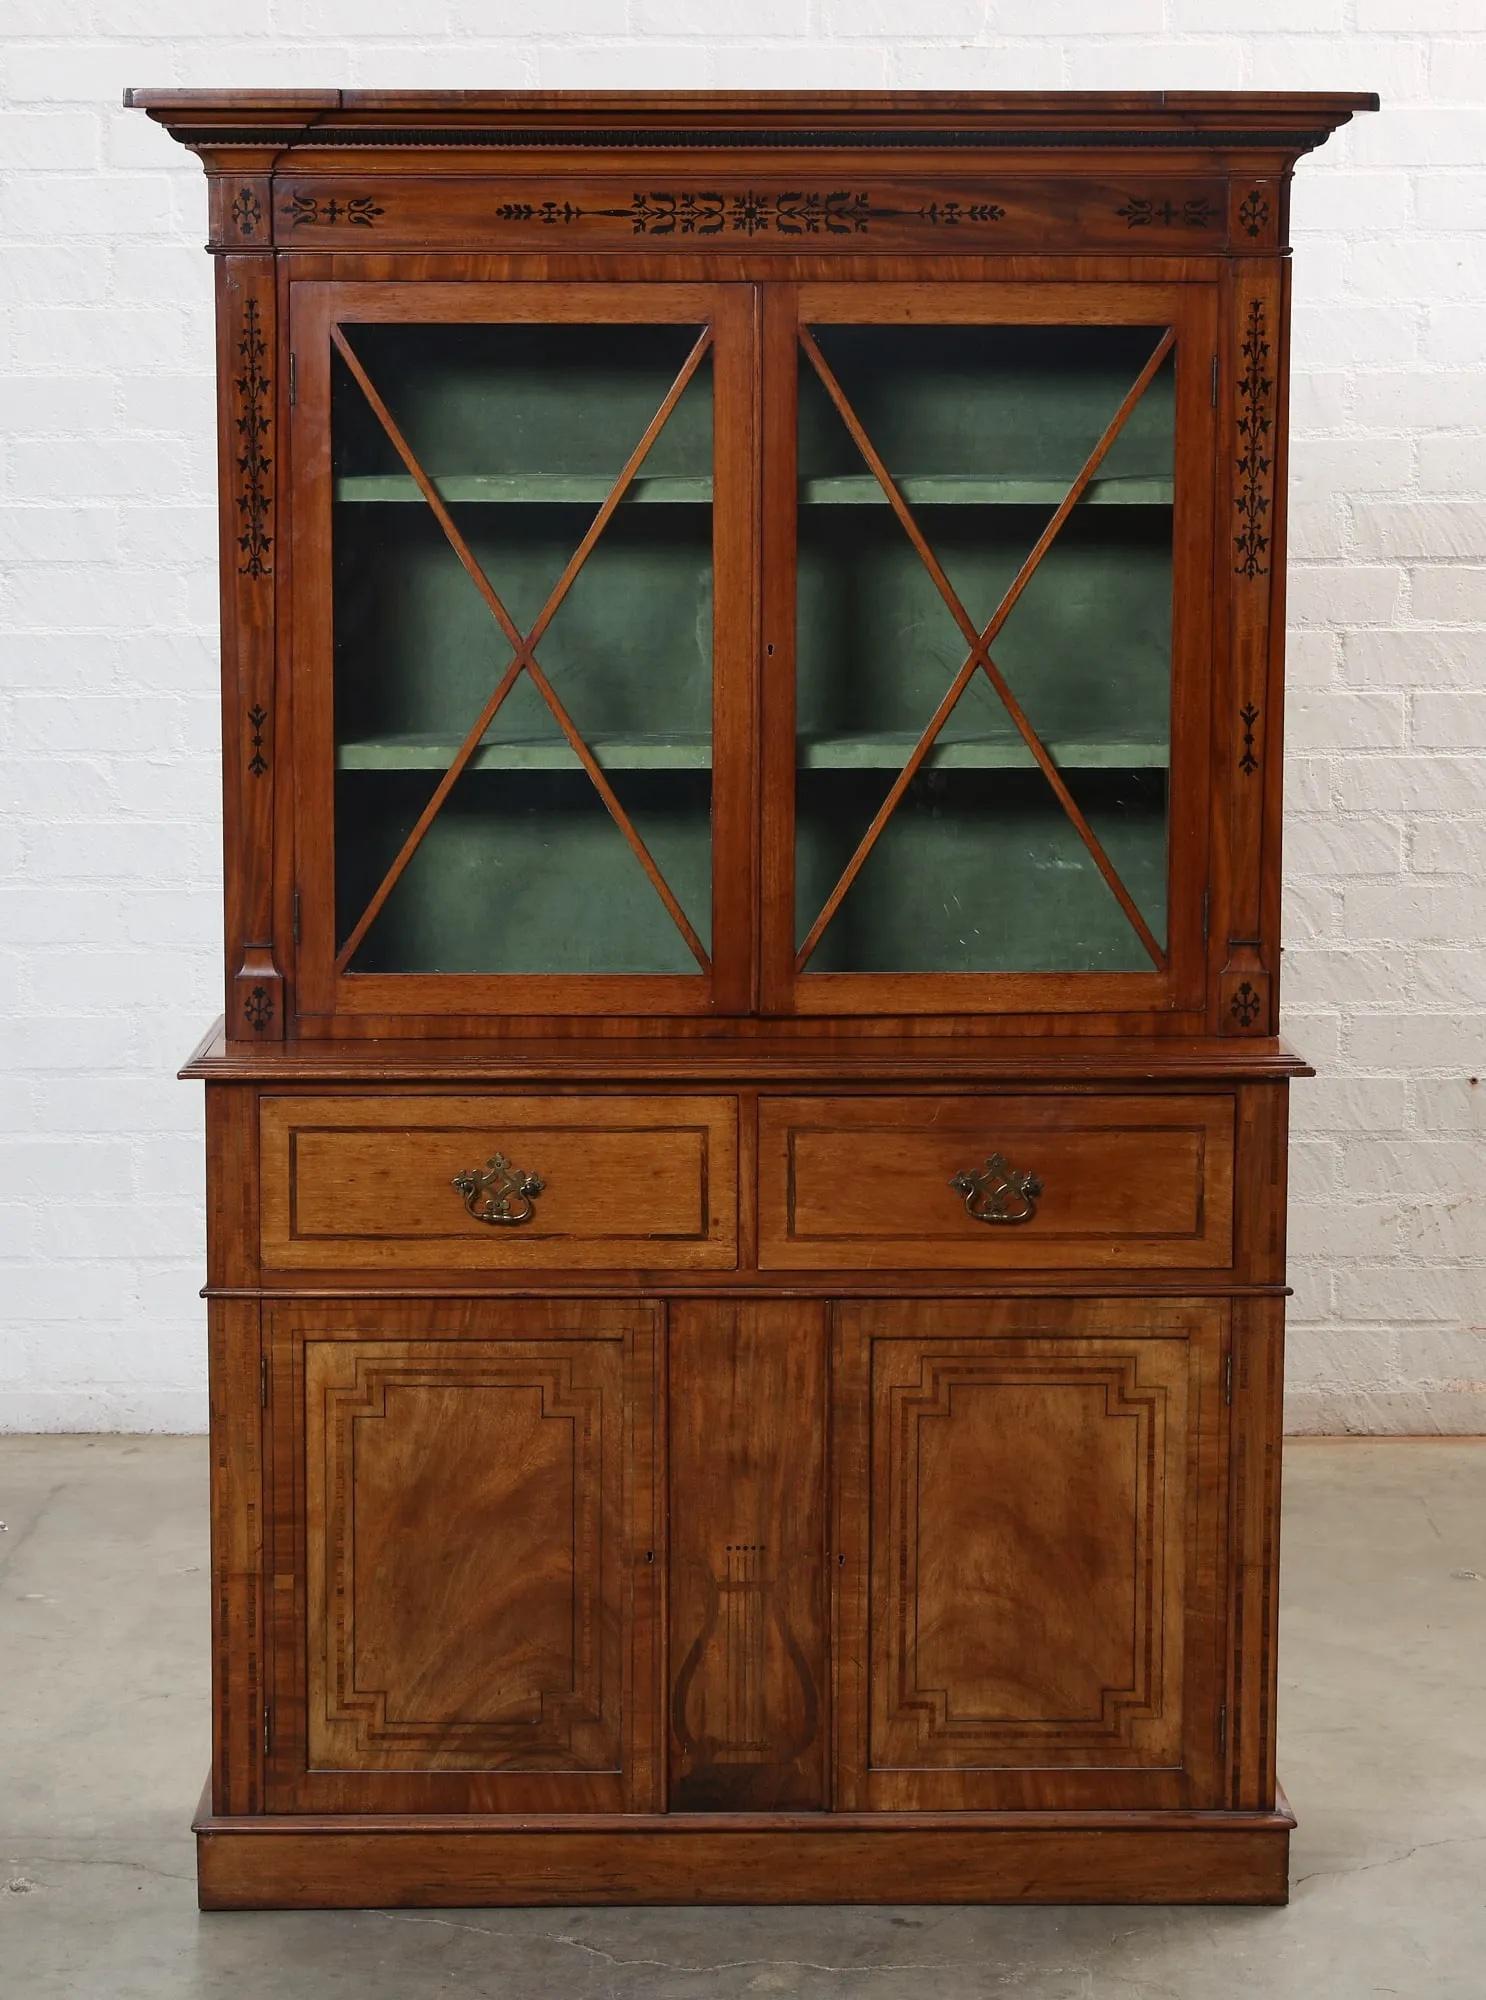 Early 19th Century English Regency Mahogany Inlaid Step Back Cupboard / Bookcase with Intricate Marquetry Detailing. Pair of diagonally cut glazed cabinet doors above pair of dovetailed drawers above two doors opening to lower cabinet compartment.